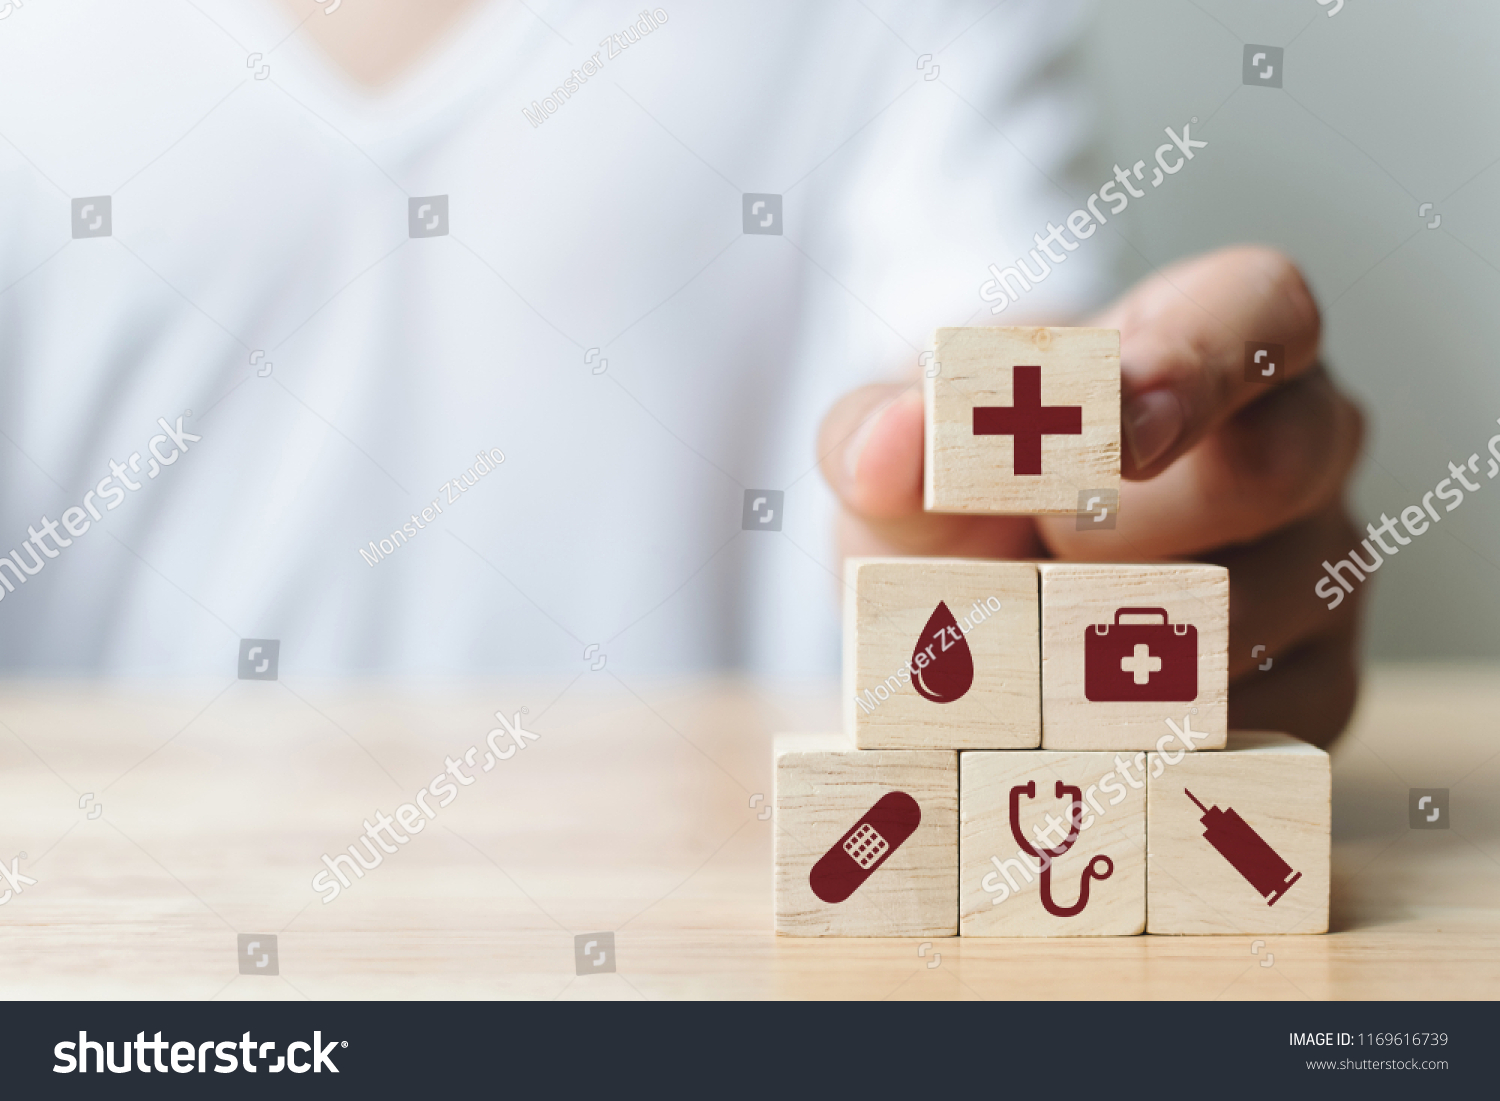 Hand arranging wood block stacking with icon healthcare medical, Insurance for your health concept #1169616739